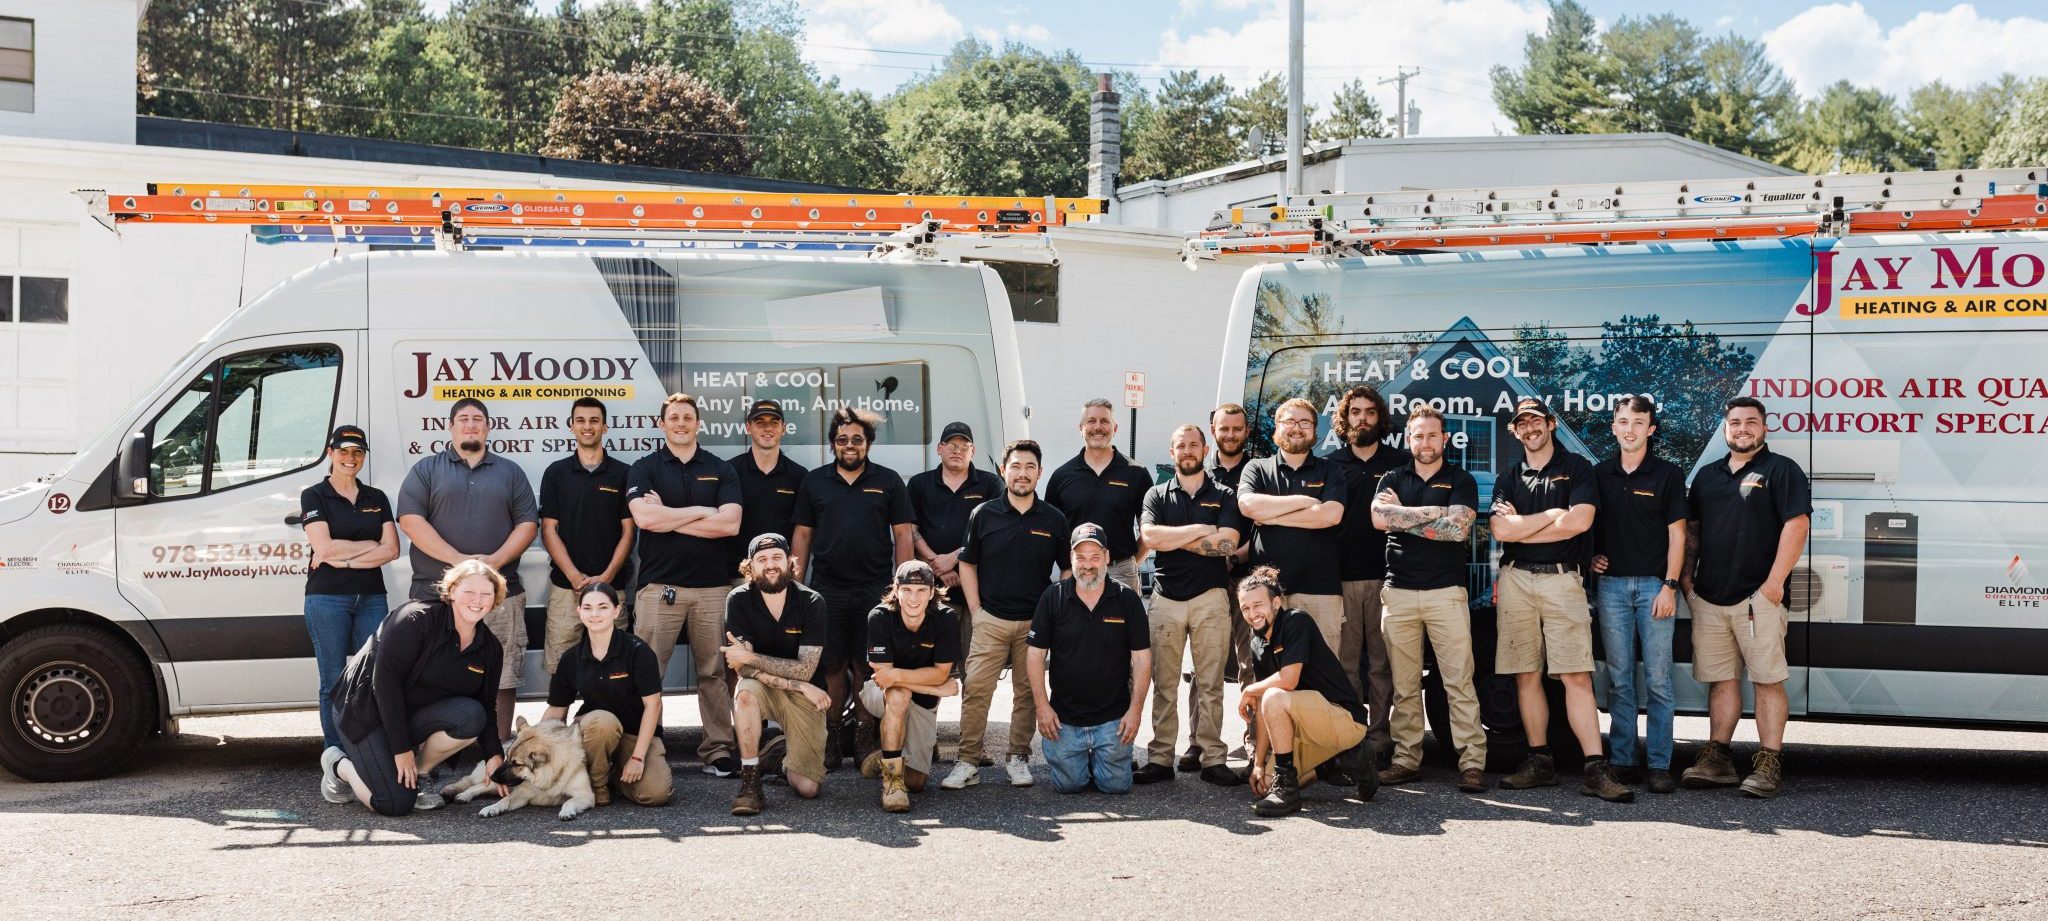 Jay Moody HVAC and electrical team group photo.